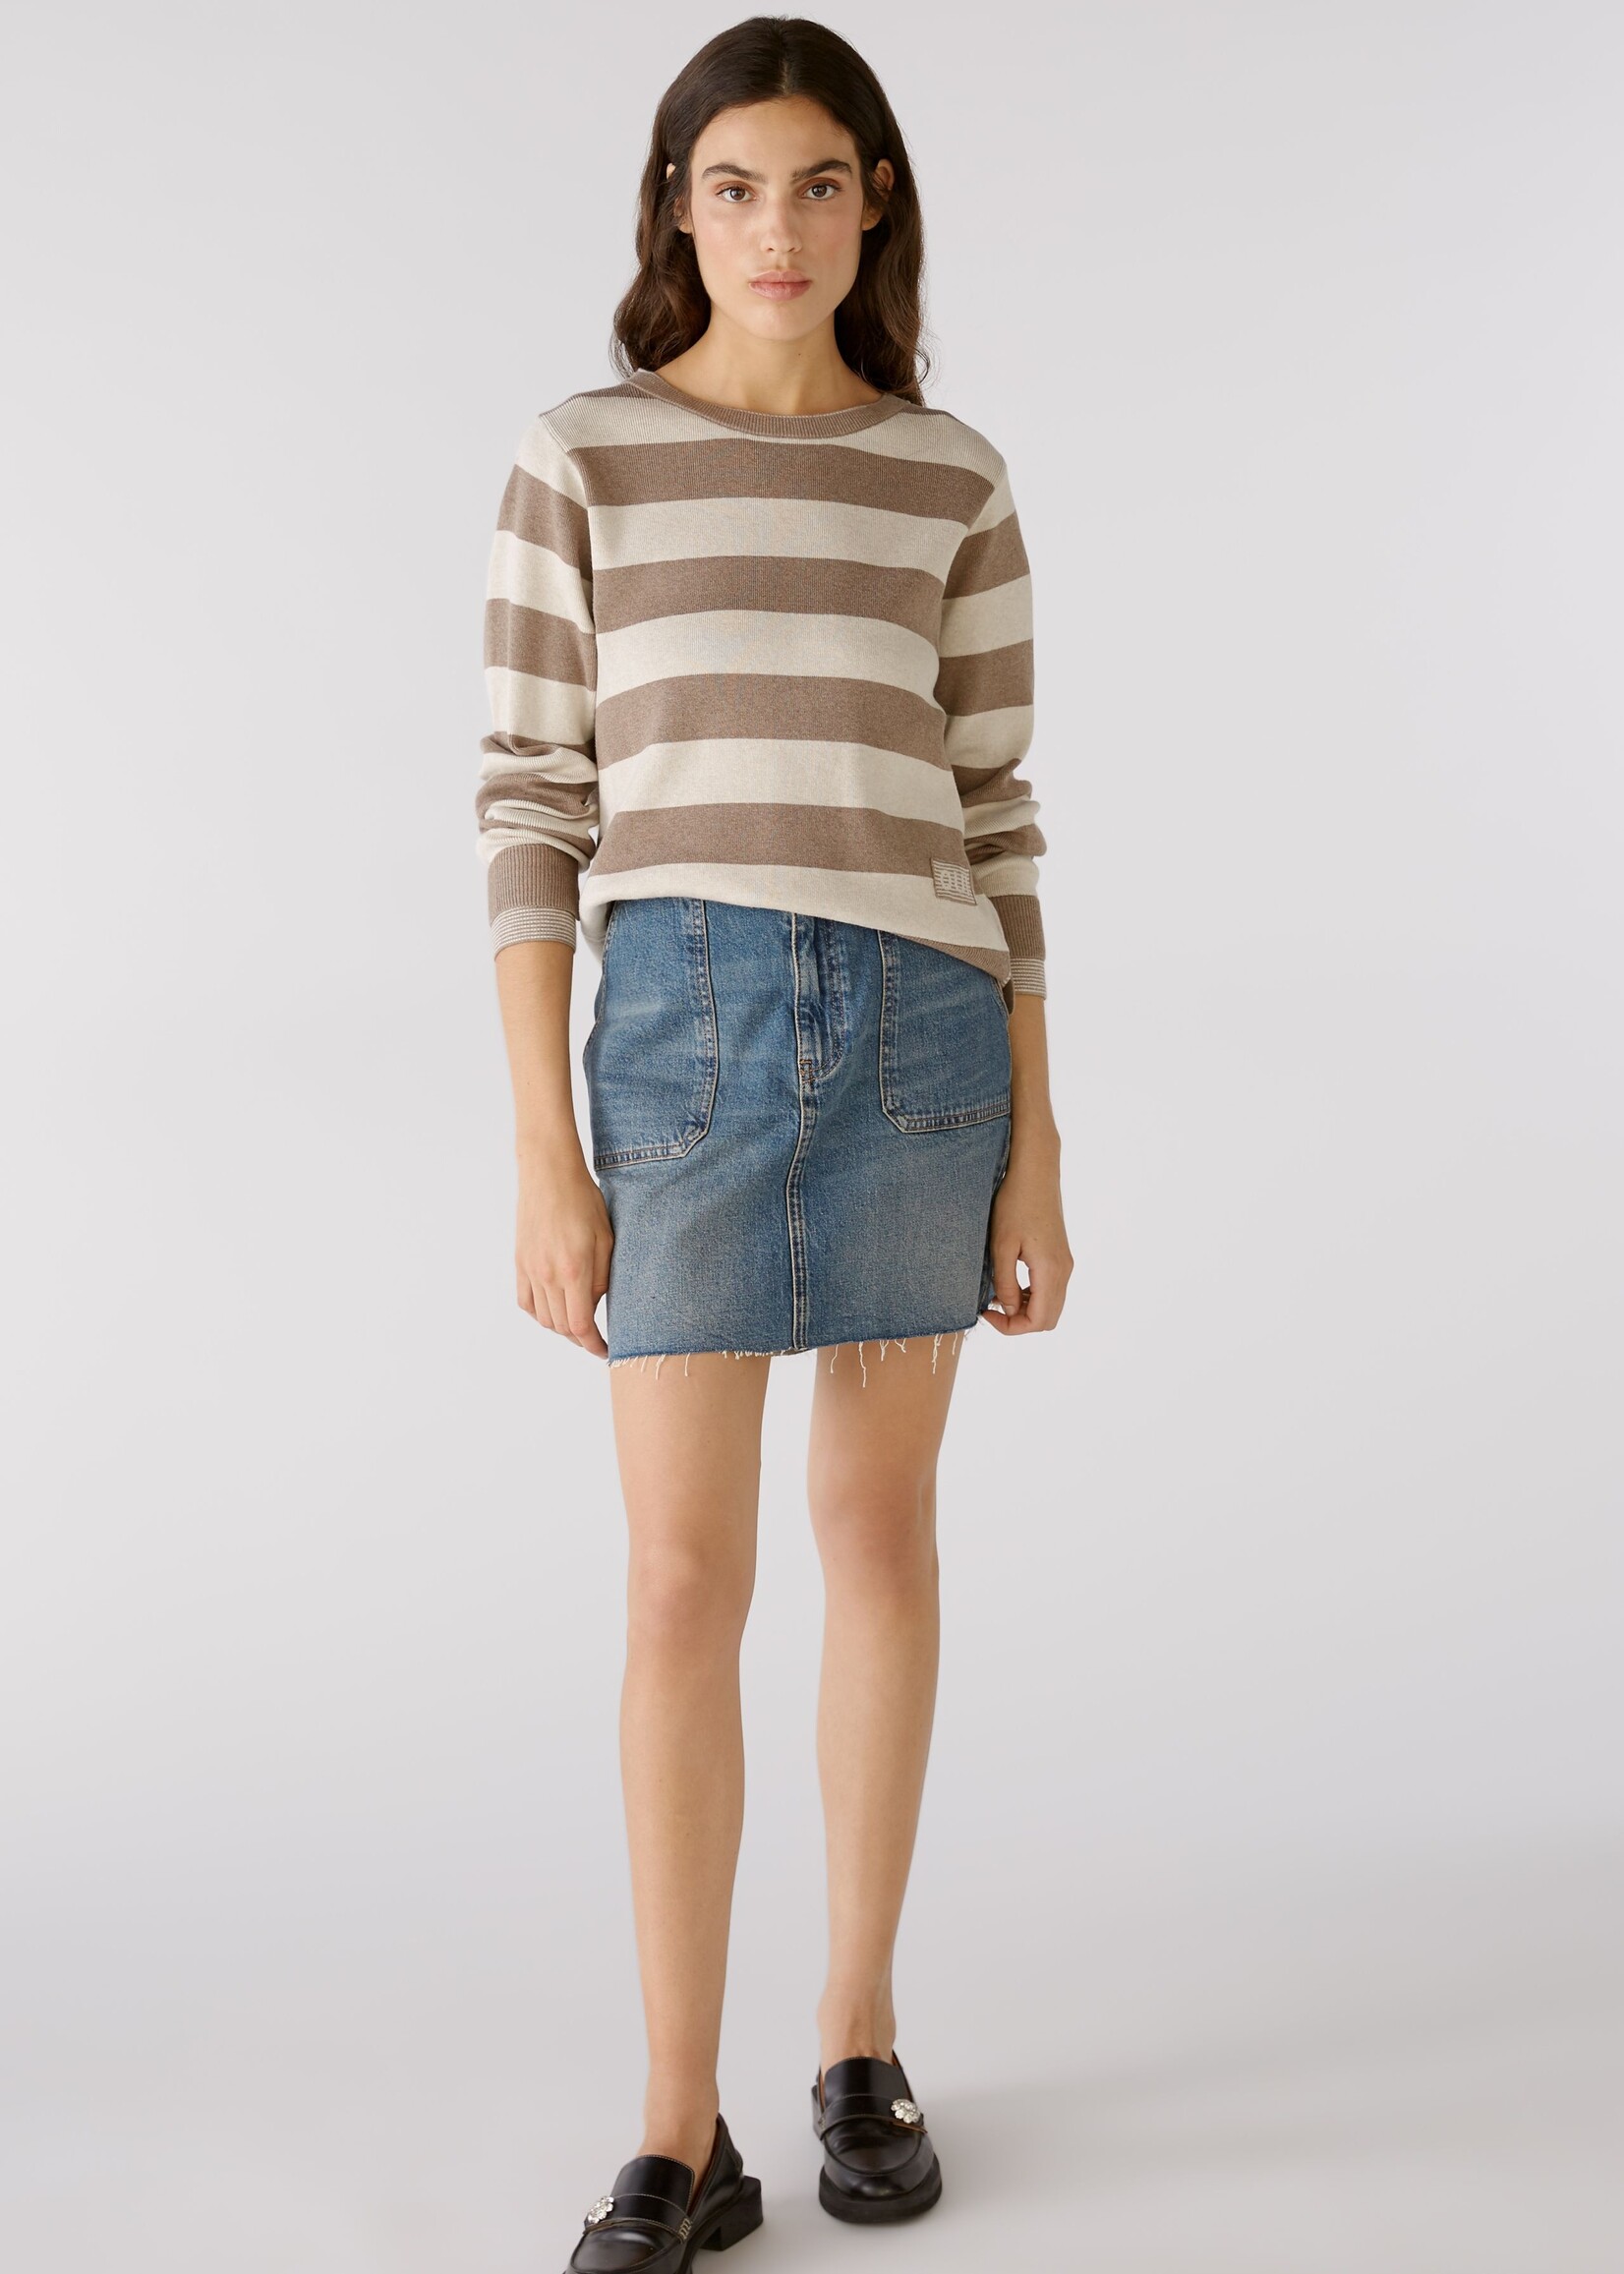 Ouí Pullover Striped Oui